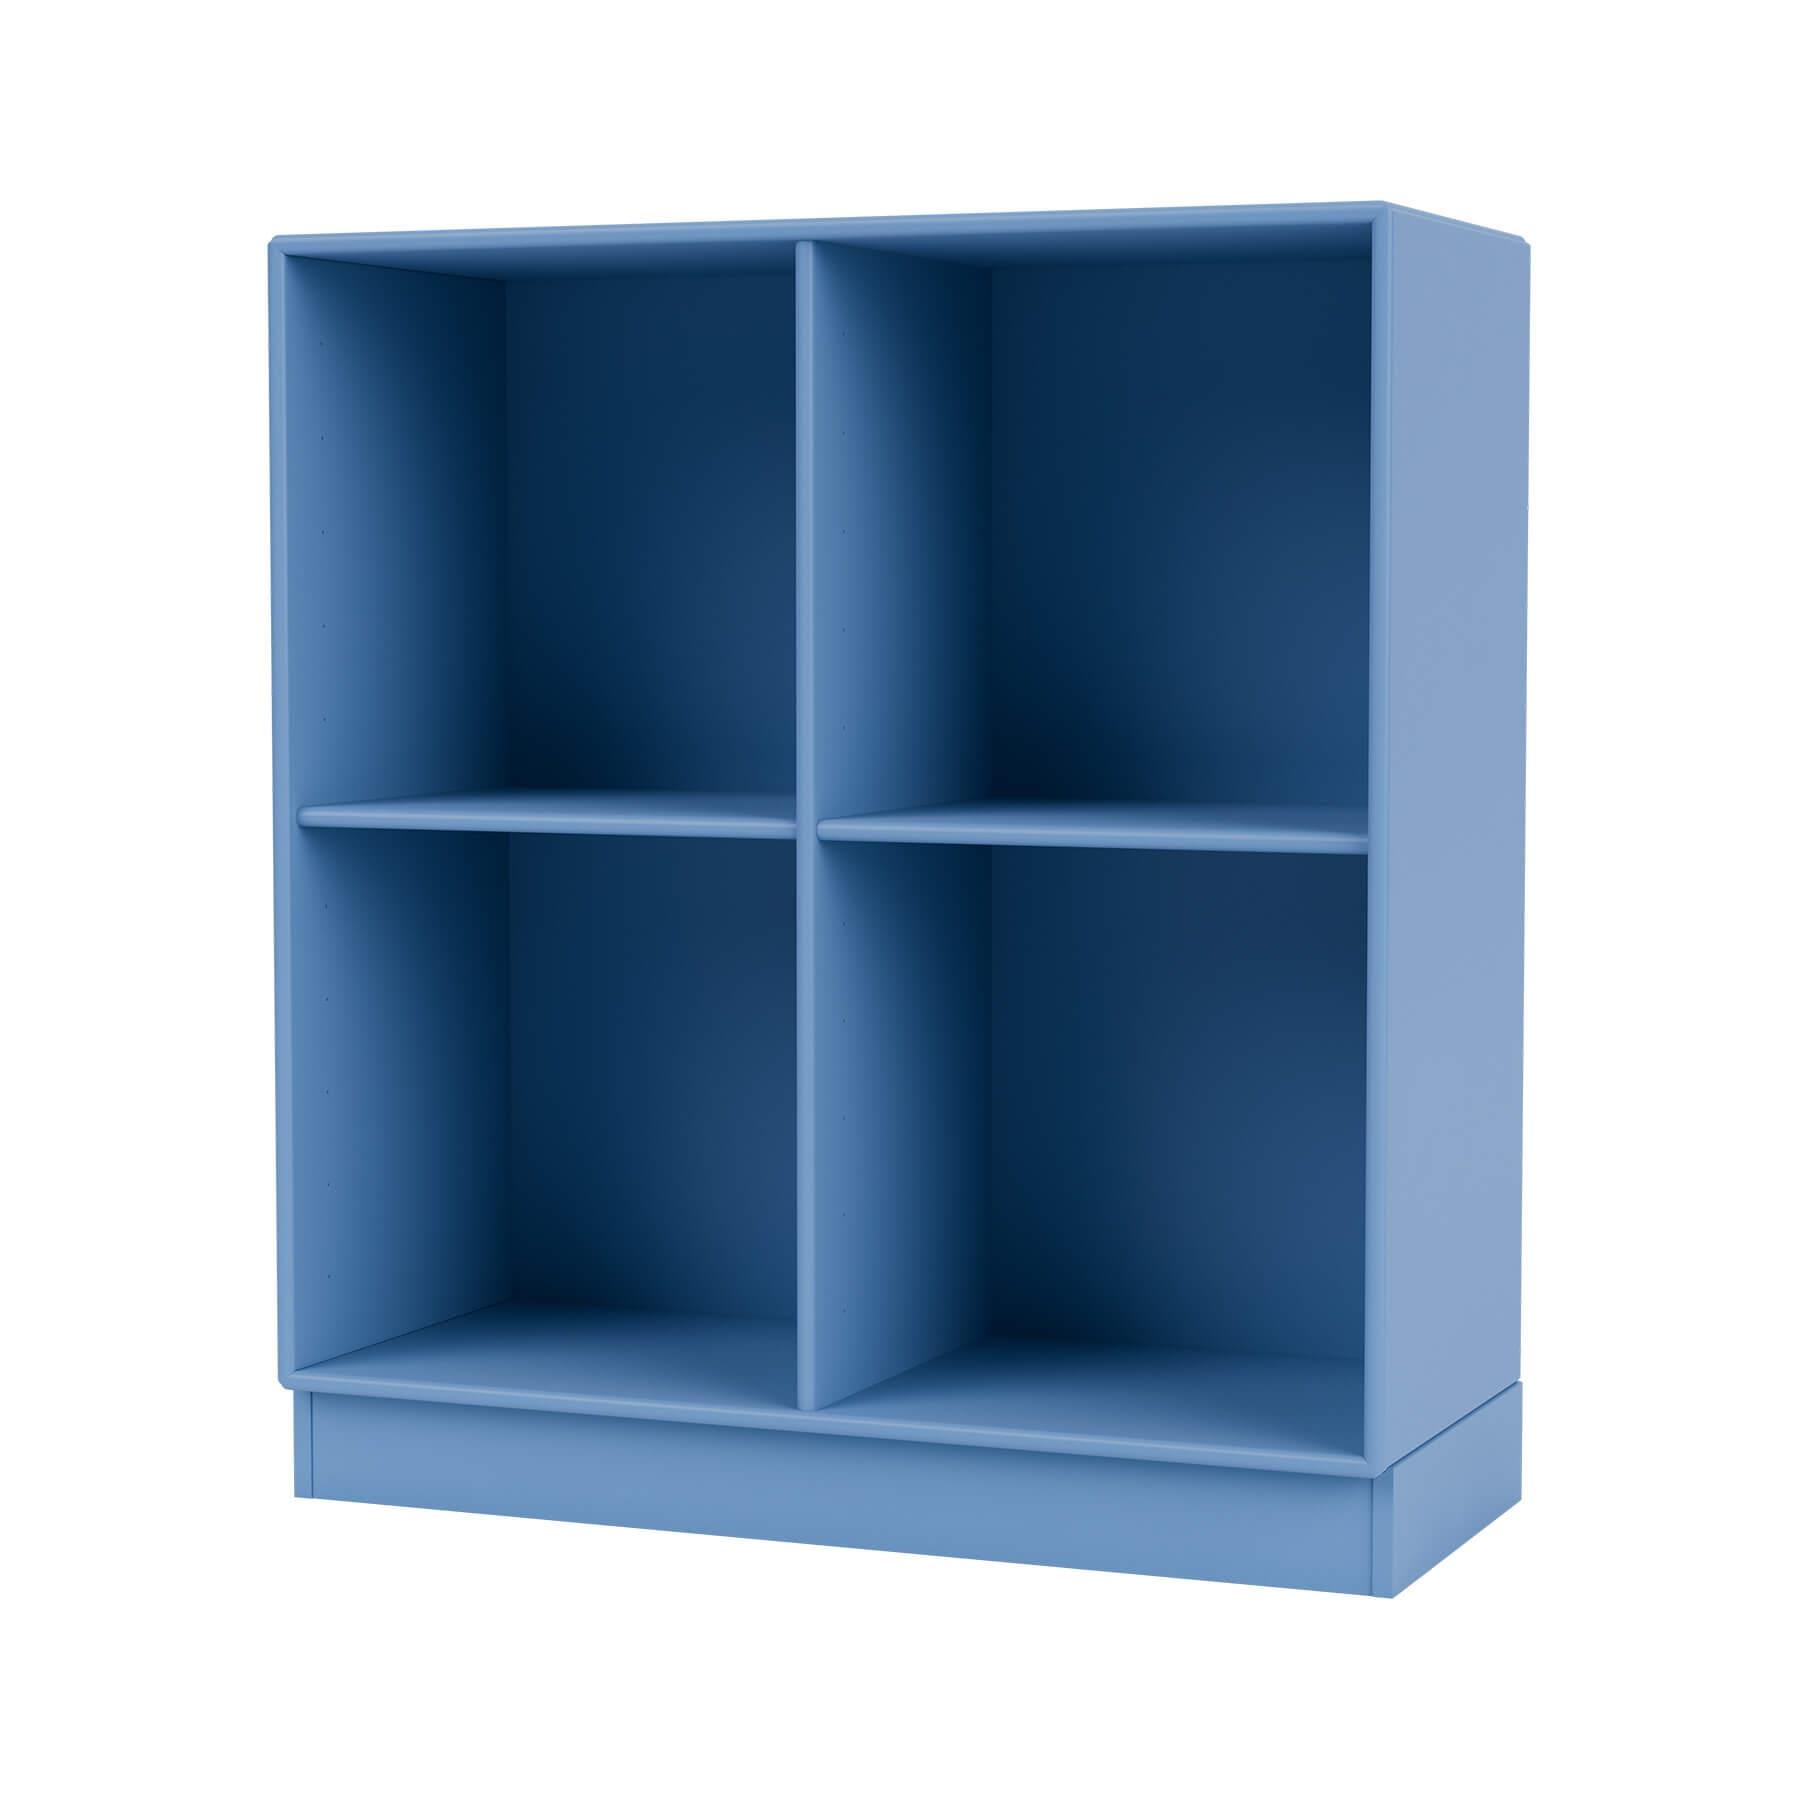 Montana Show Bookcase Azure Plinth Blue Designer Furniture From Holloways Of Ludlow